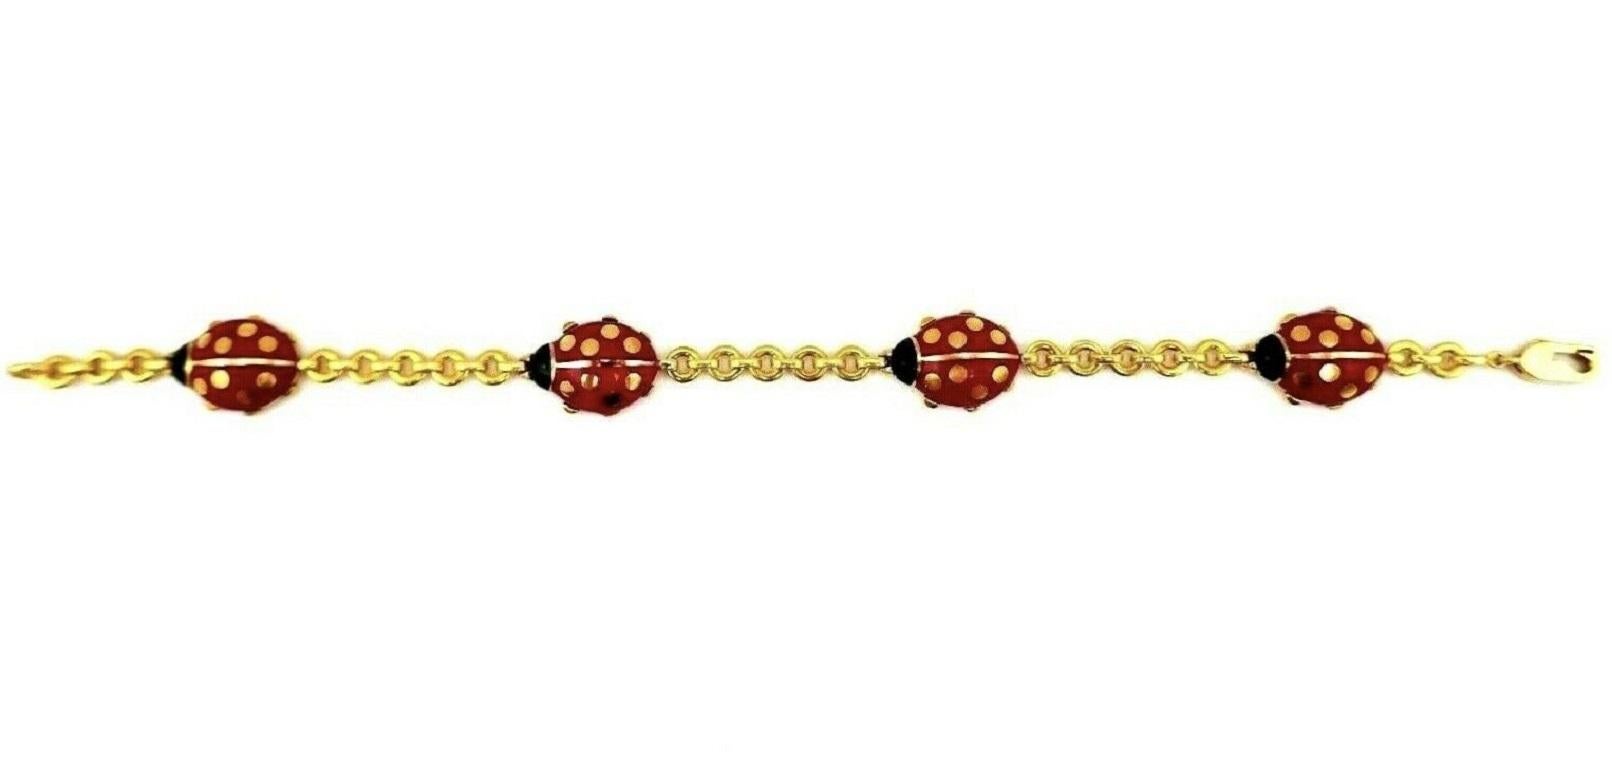 A well-known vintage Ladybug bracelet by Cartier. Made of 18k yellow gold and enamel. 
Stamped with Cartier maker's marks, a serial number, a year of production (1990) and a hallmark for 18k gold. 
Measurements: 7